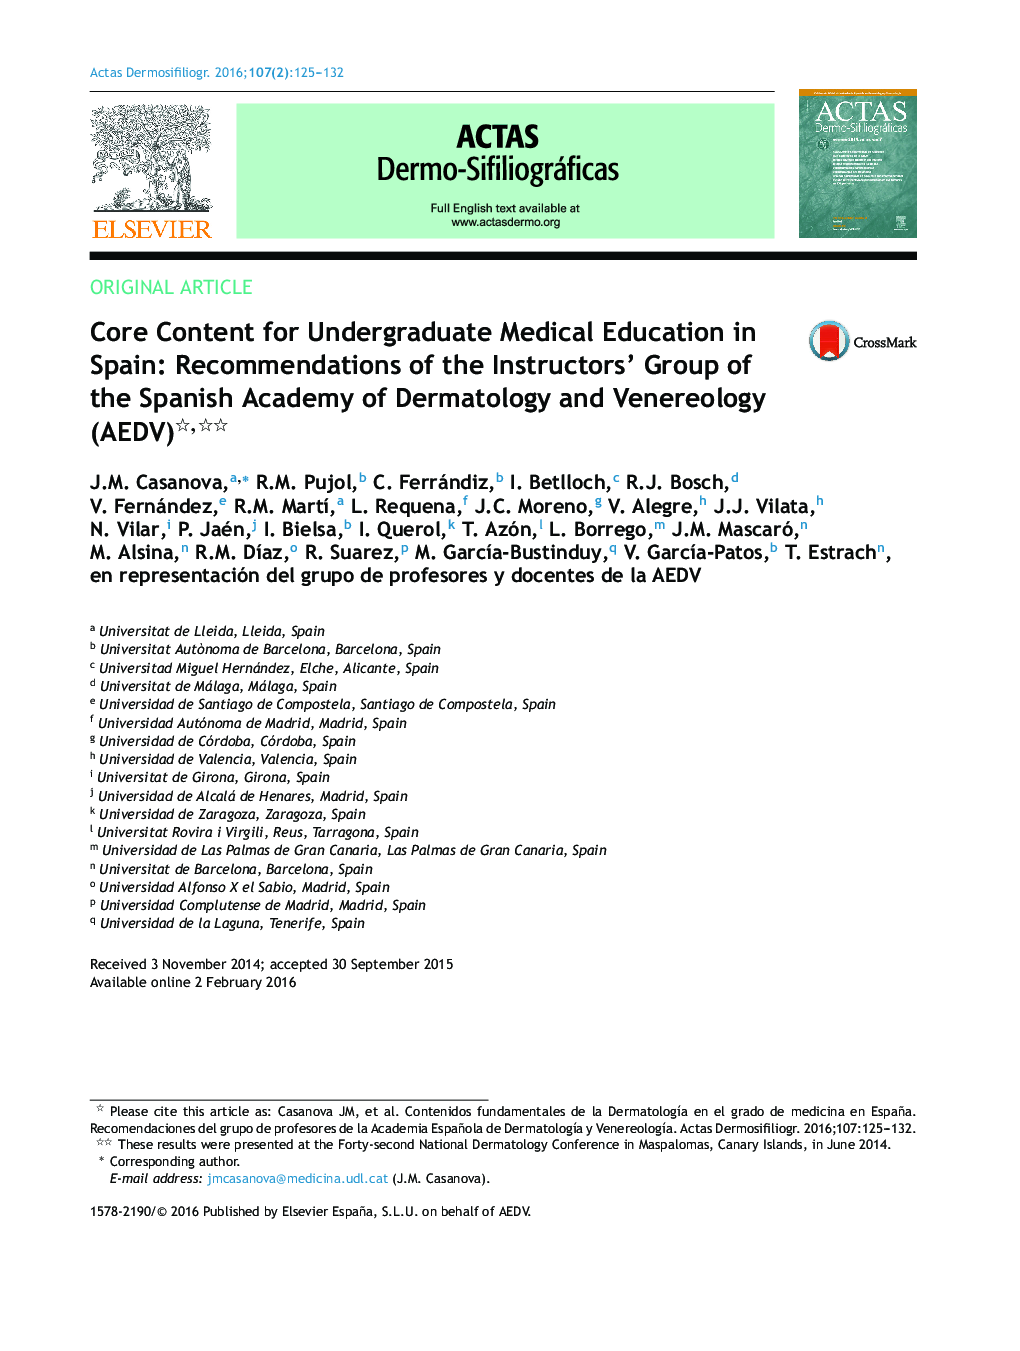 Core Content for Undergraduate Medical Education in Spain: Recommendations of the Instructors’ Group of the Spanish Academy of Dermatology and Venereology (AEDV) 